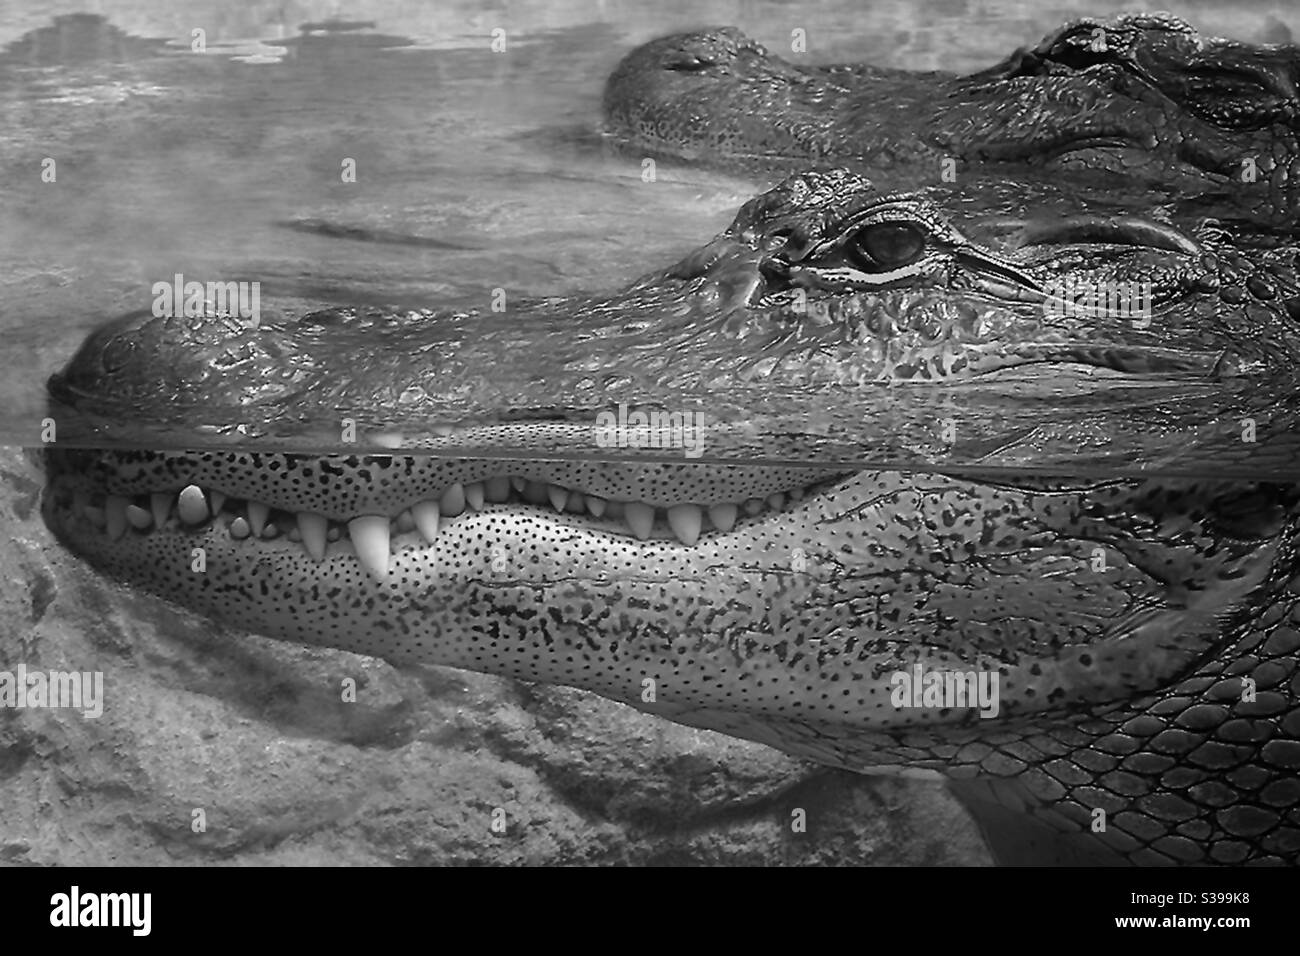 Crocodile, the head shoots out of the water. You can clearly see the teeth, the mouth and the eyes above and below the water. Picture in black and white Stock Photo